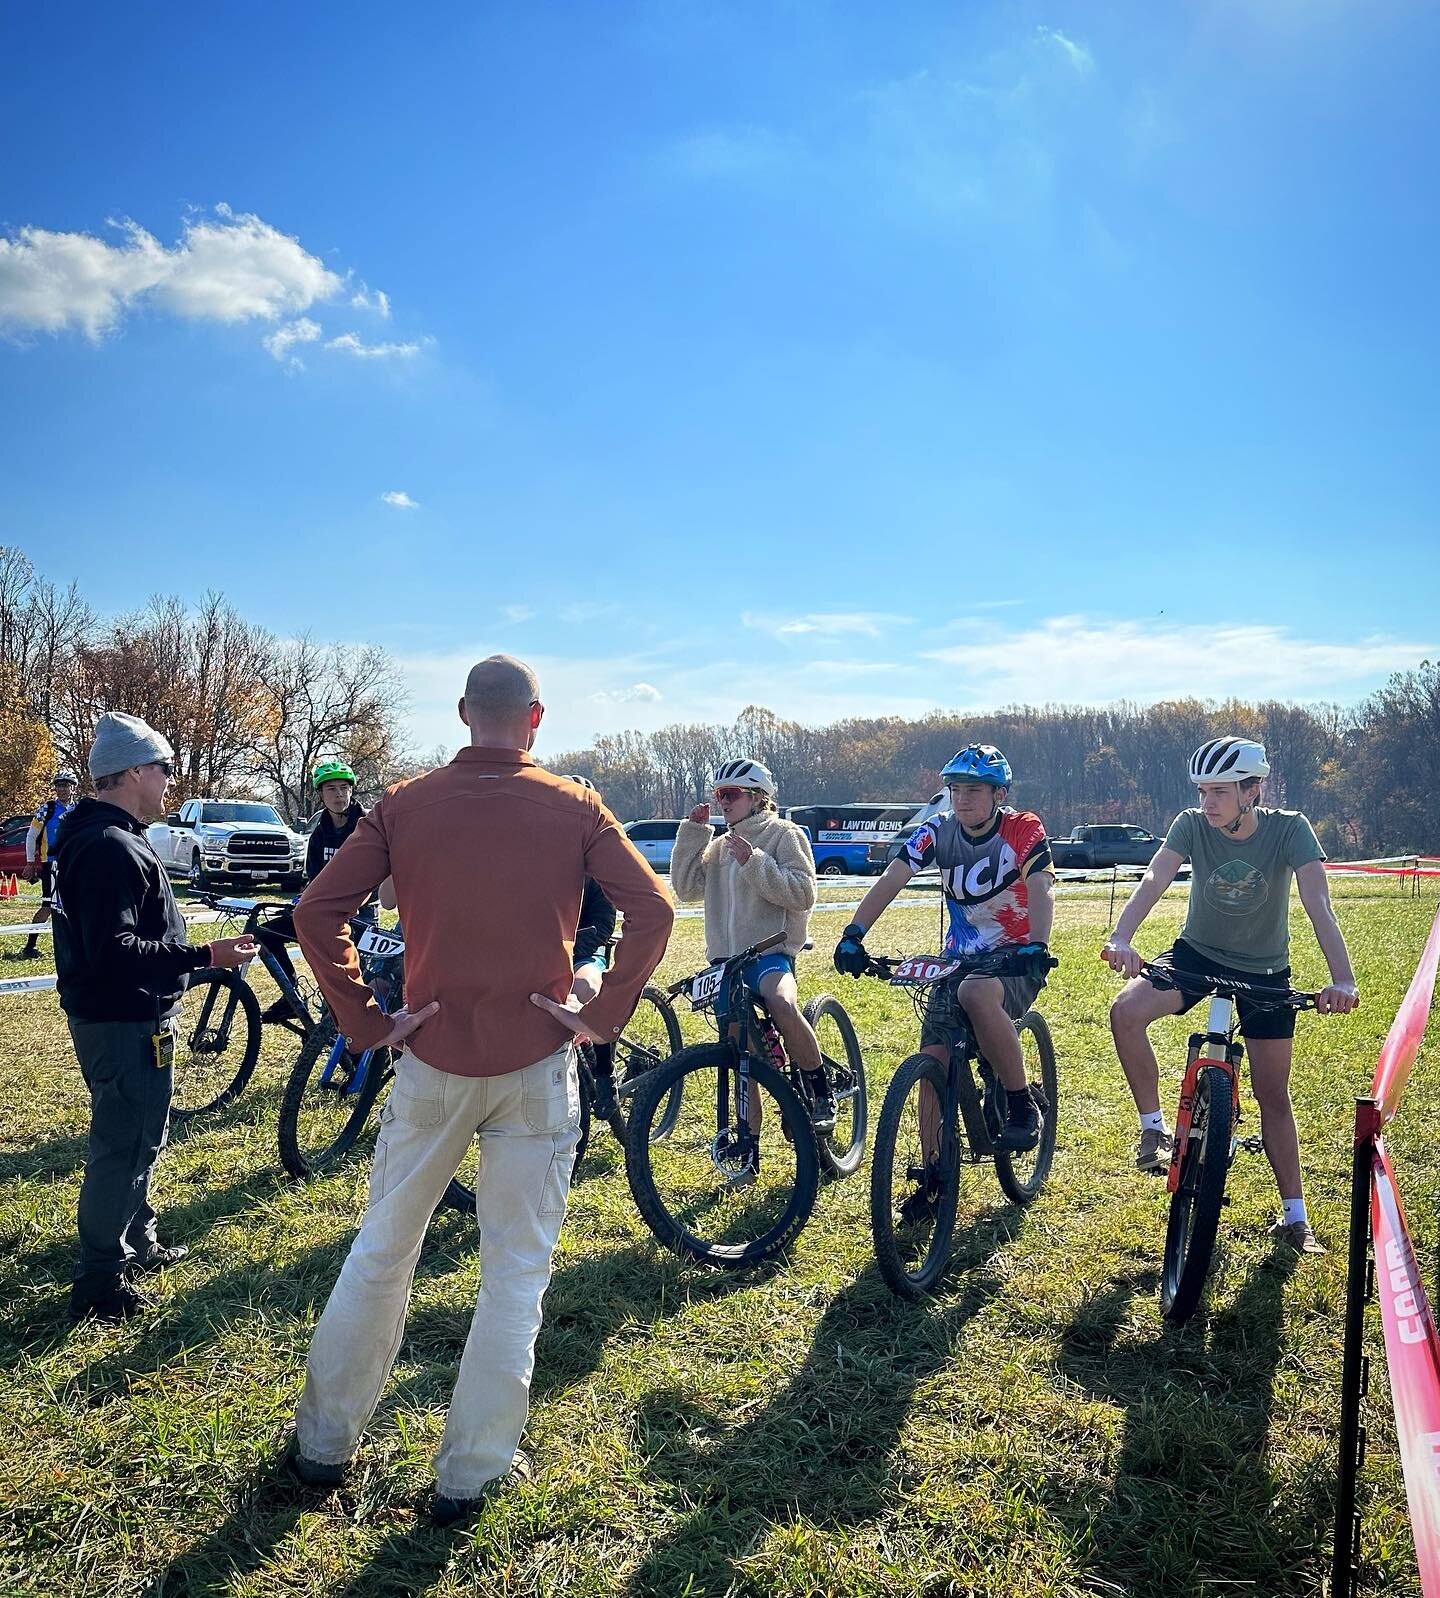 Valley Preferred will be having another grass track race at 1pm. 5 laps, about 2 minutes of fun! Come over to the finish area! @the_velodrome